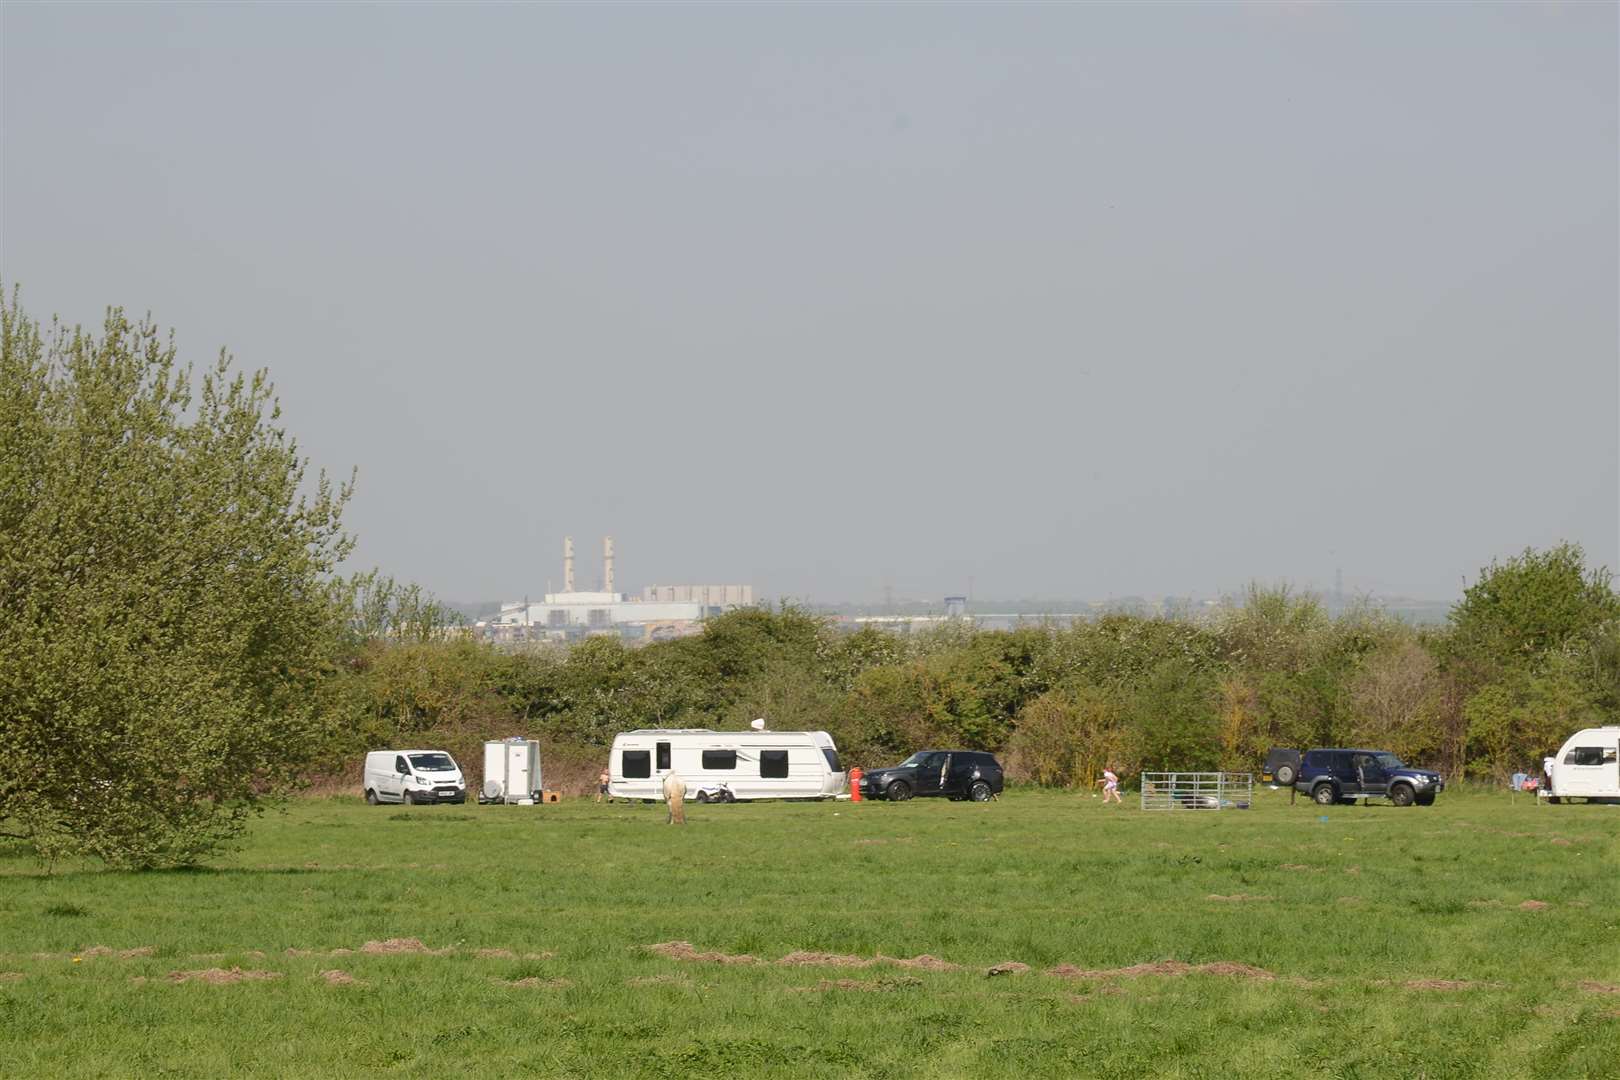 Some of the travellers camped out in a field at Riverside Country Park